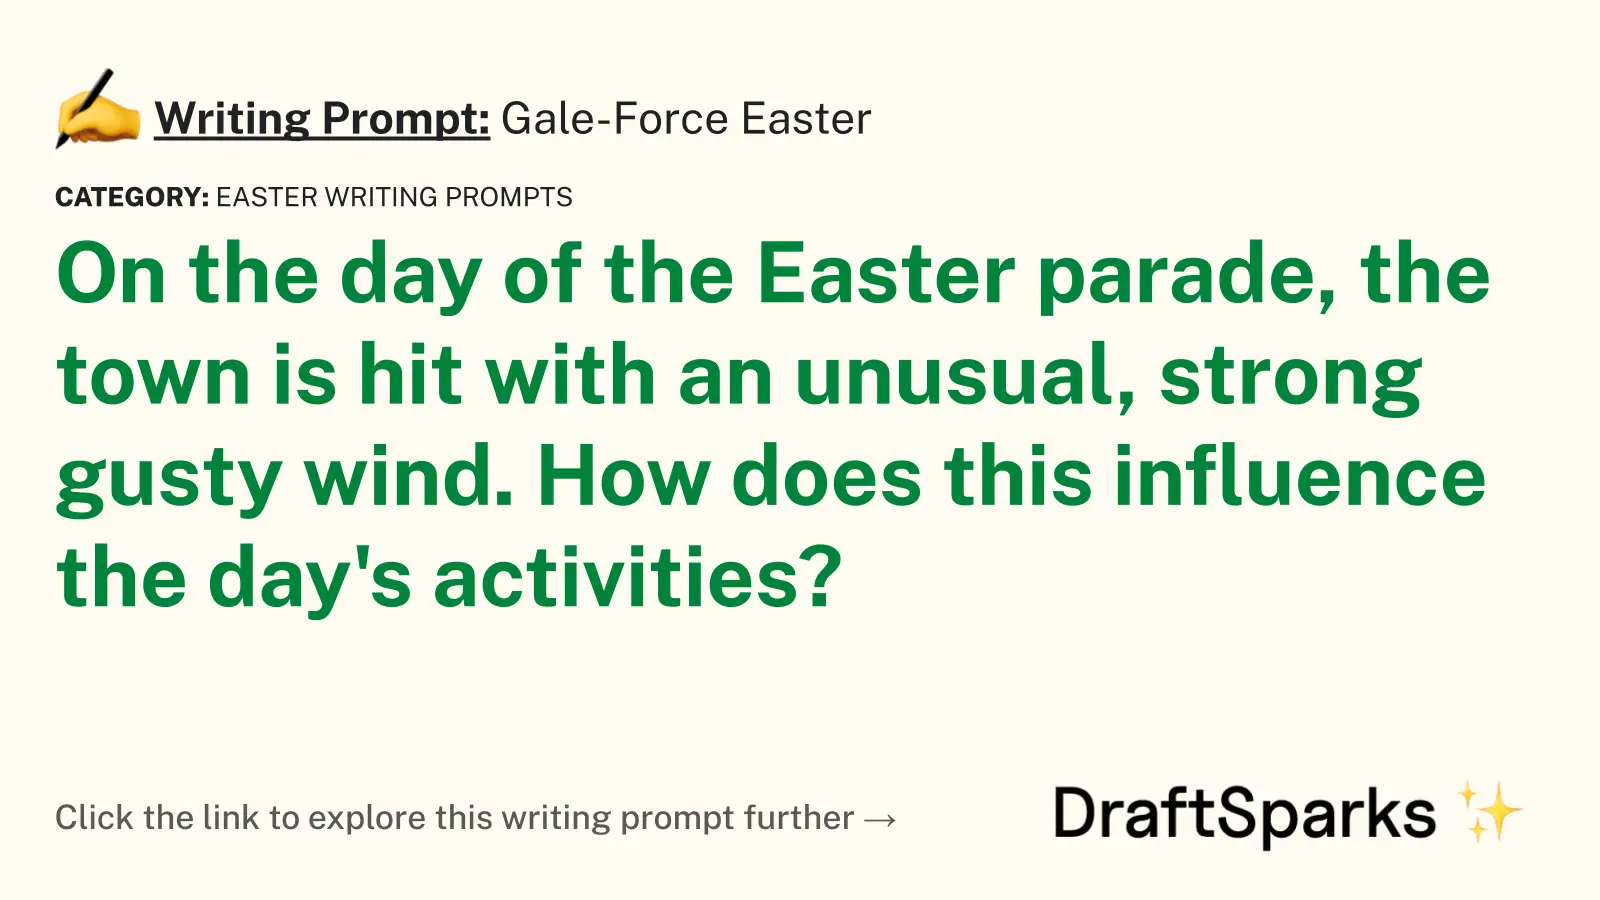 Gale-Force Easter